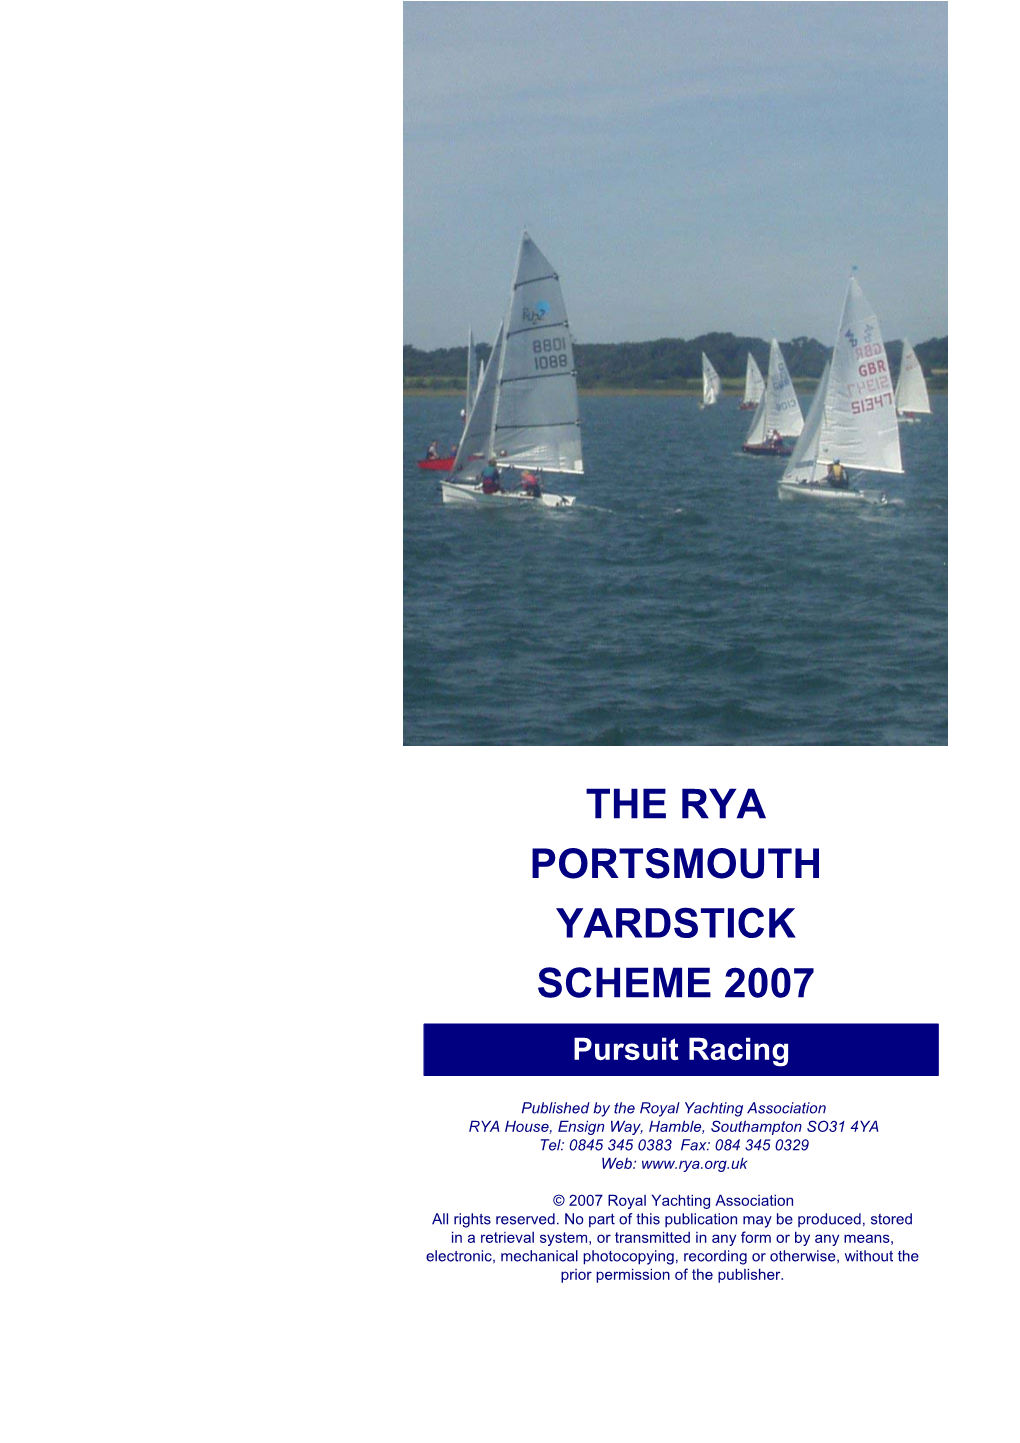 This Link Is to the RYA Pursuit Race Information Sheet